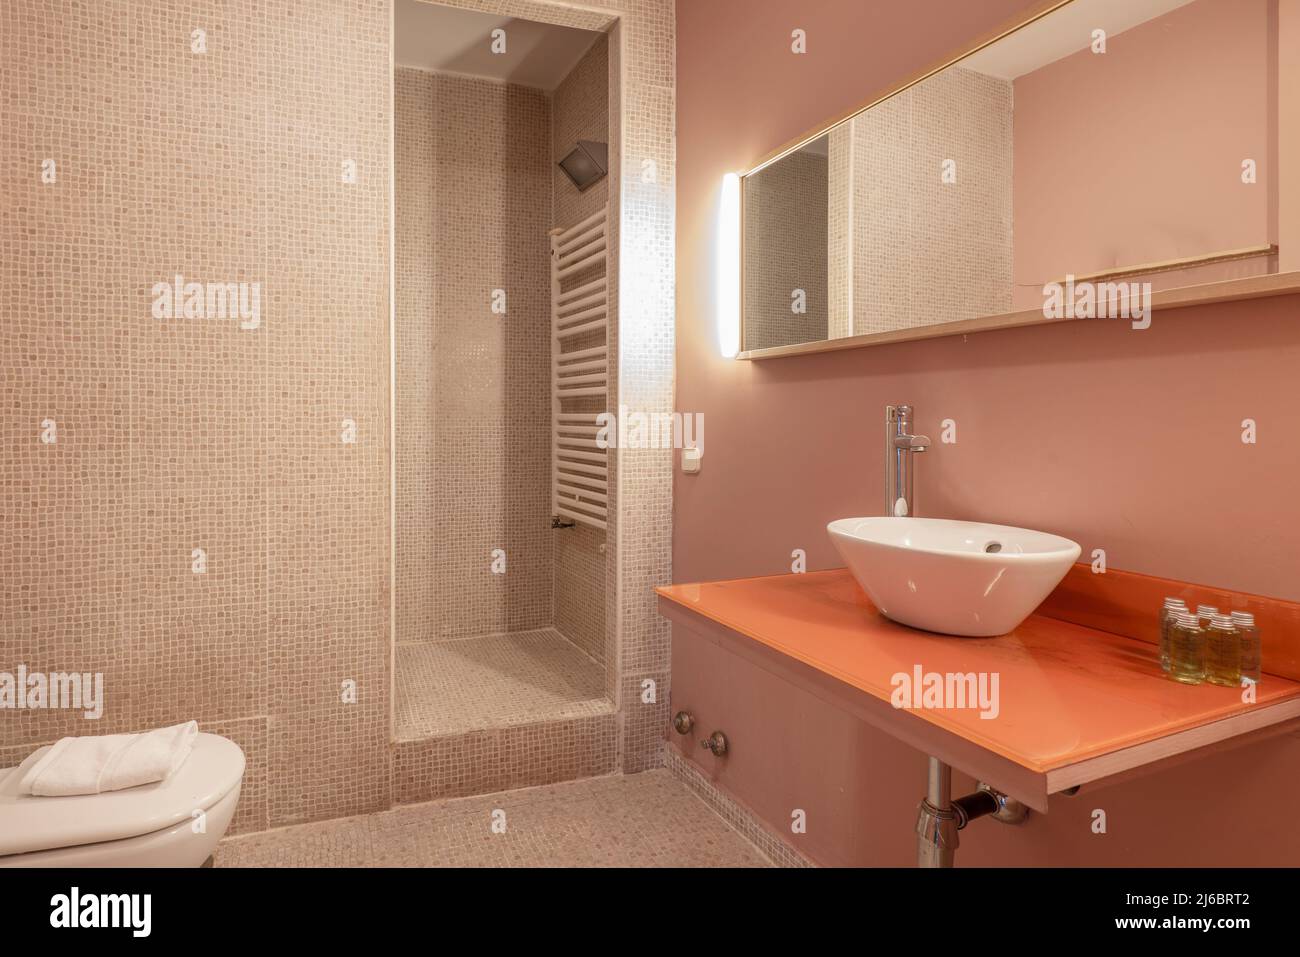 Bathroom with white porcelain sink on orange glass countertop, countertop mirror, tiled walls and walk-in shower Stock Photo